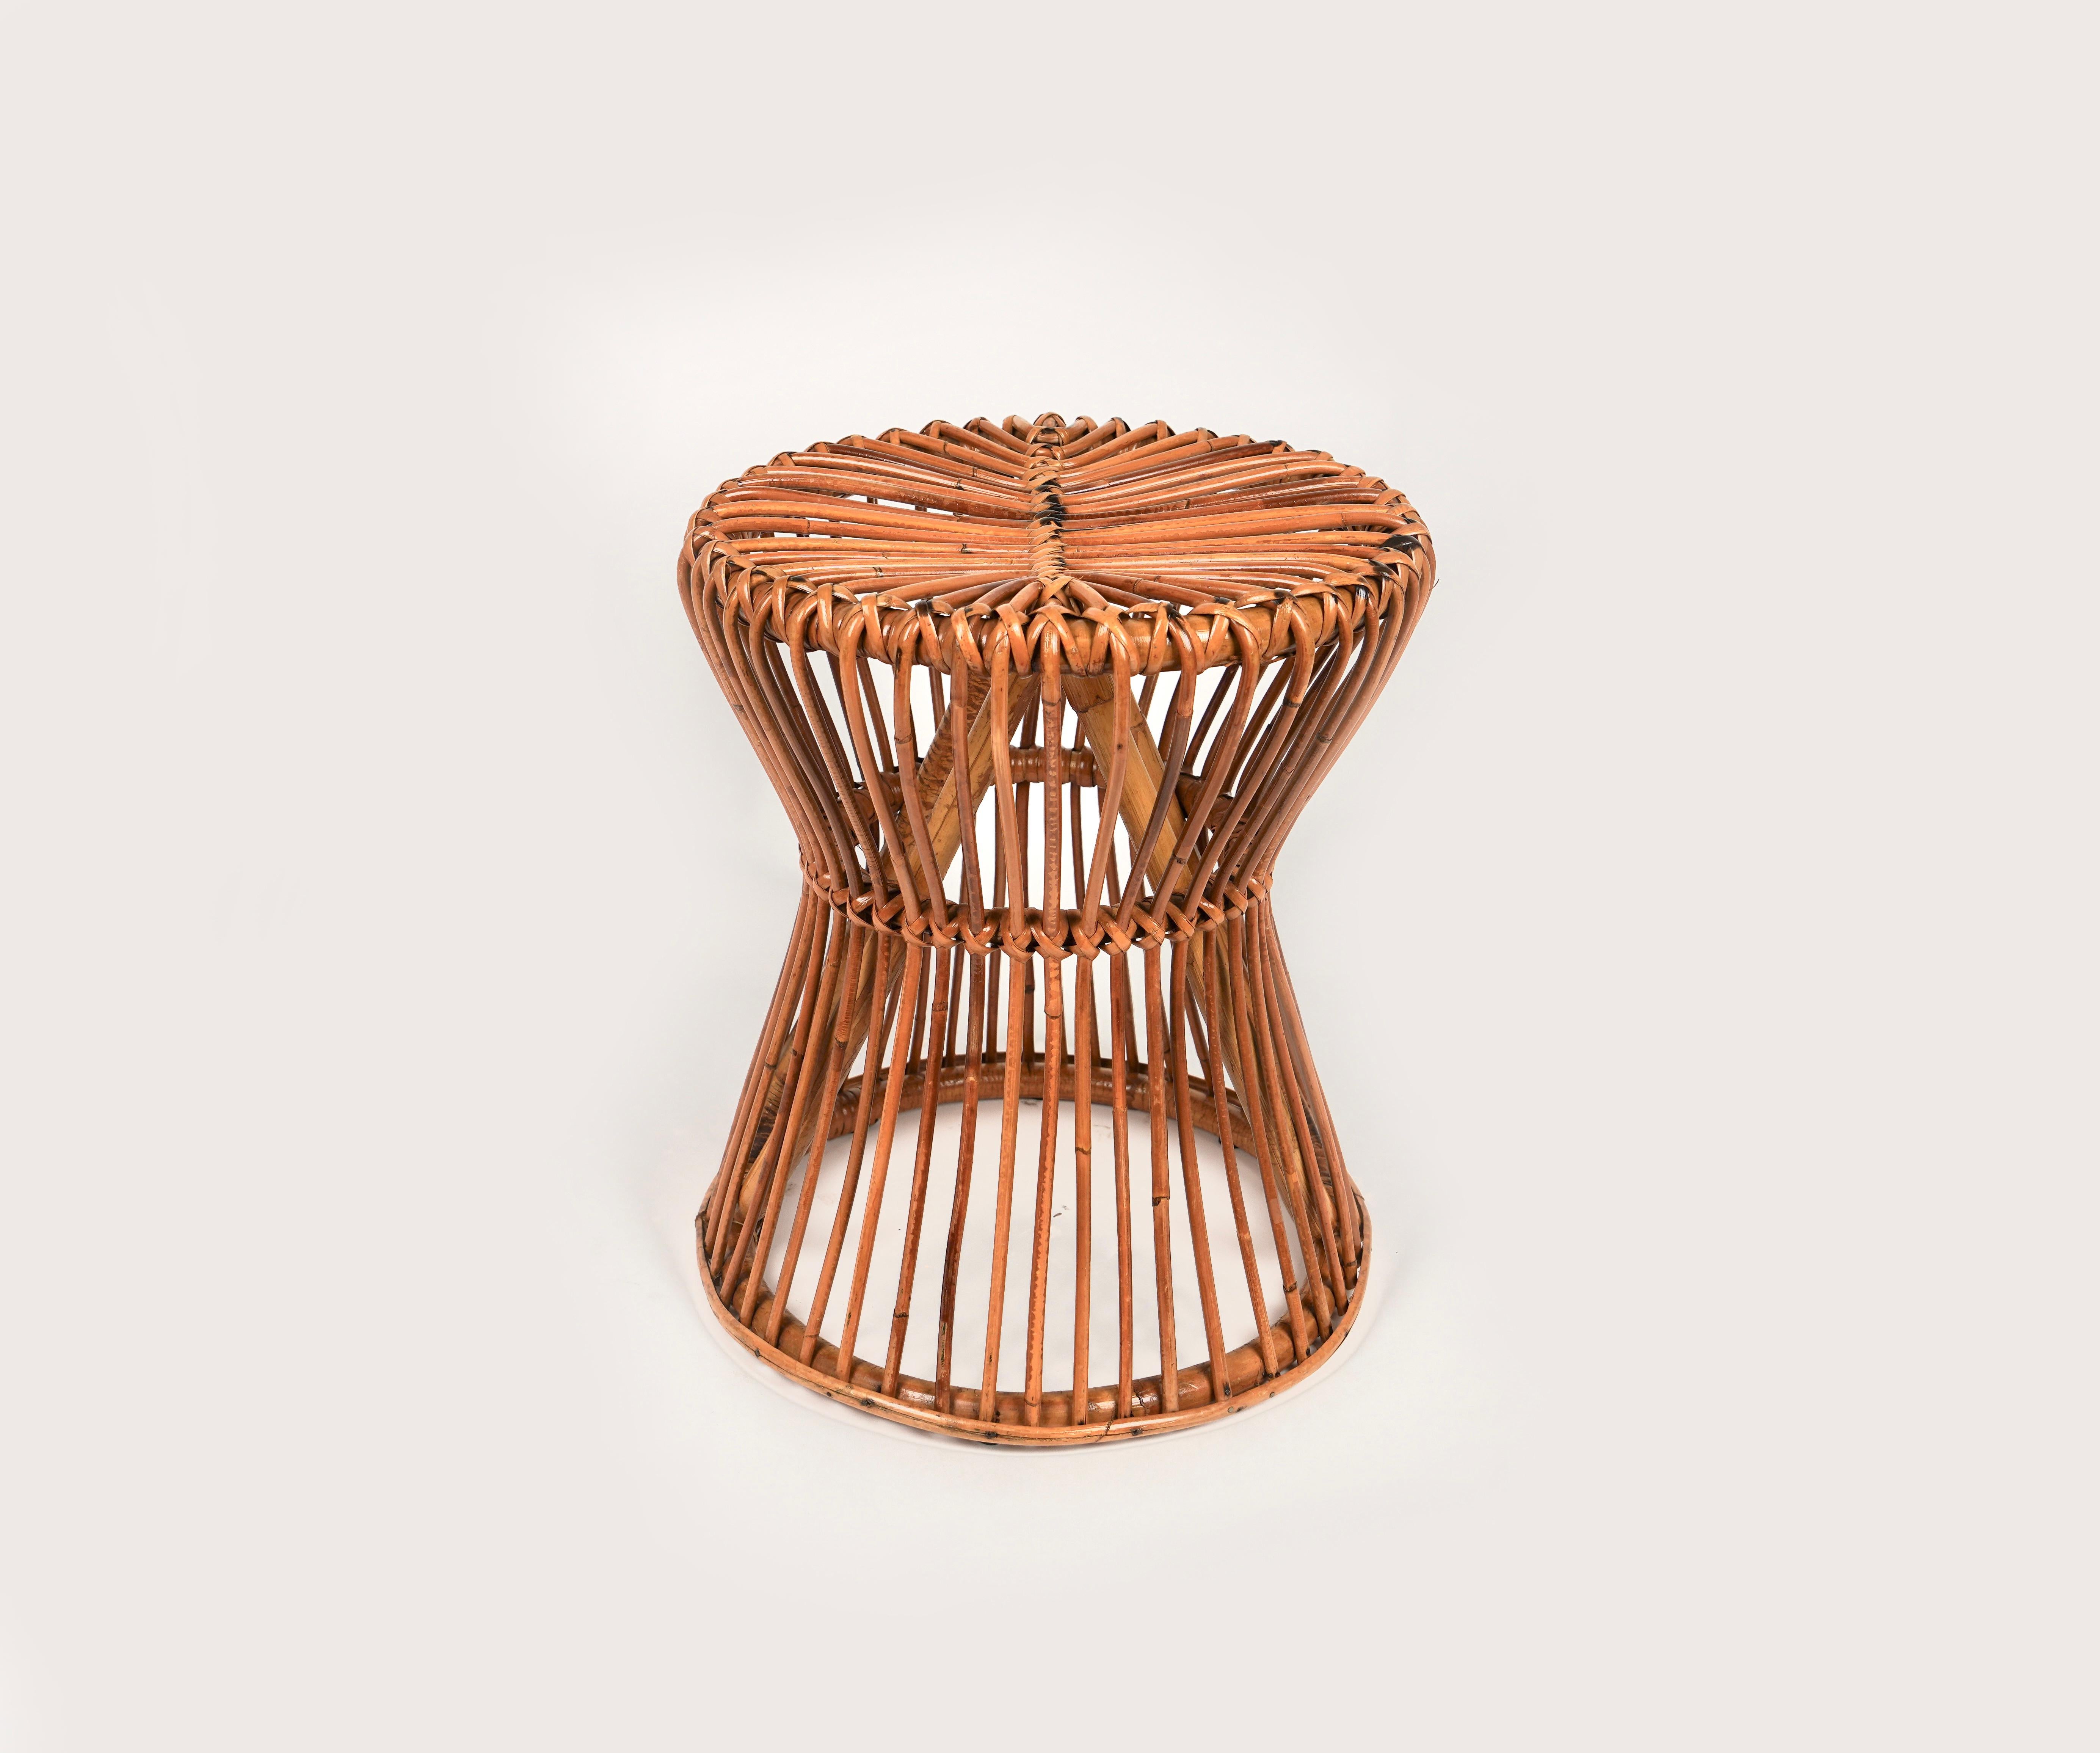 Mid-20th Century Midcentury Rattan and Bamboo Stool or Side Table Bonacina Style, Italy, 1960s